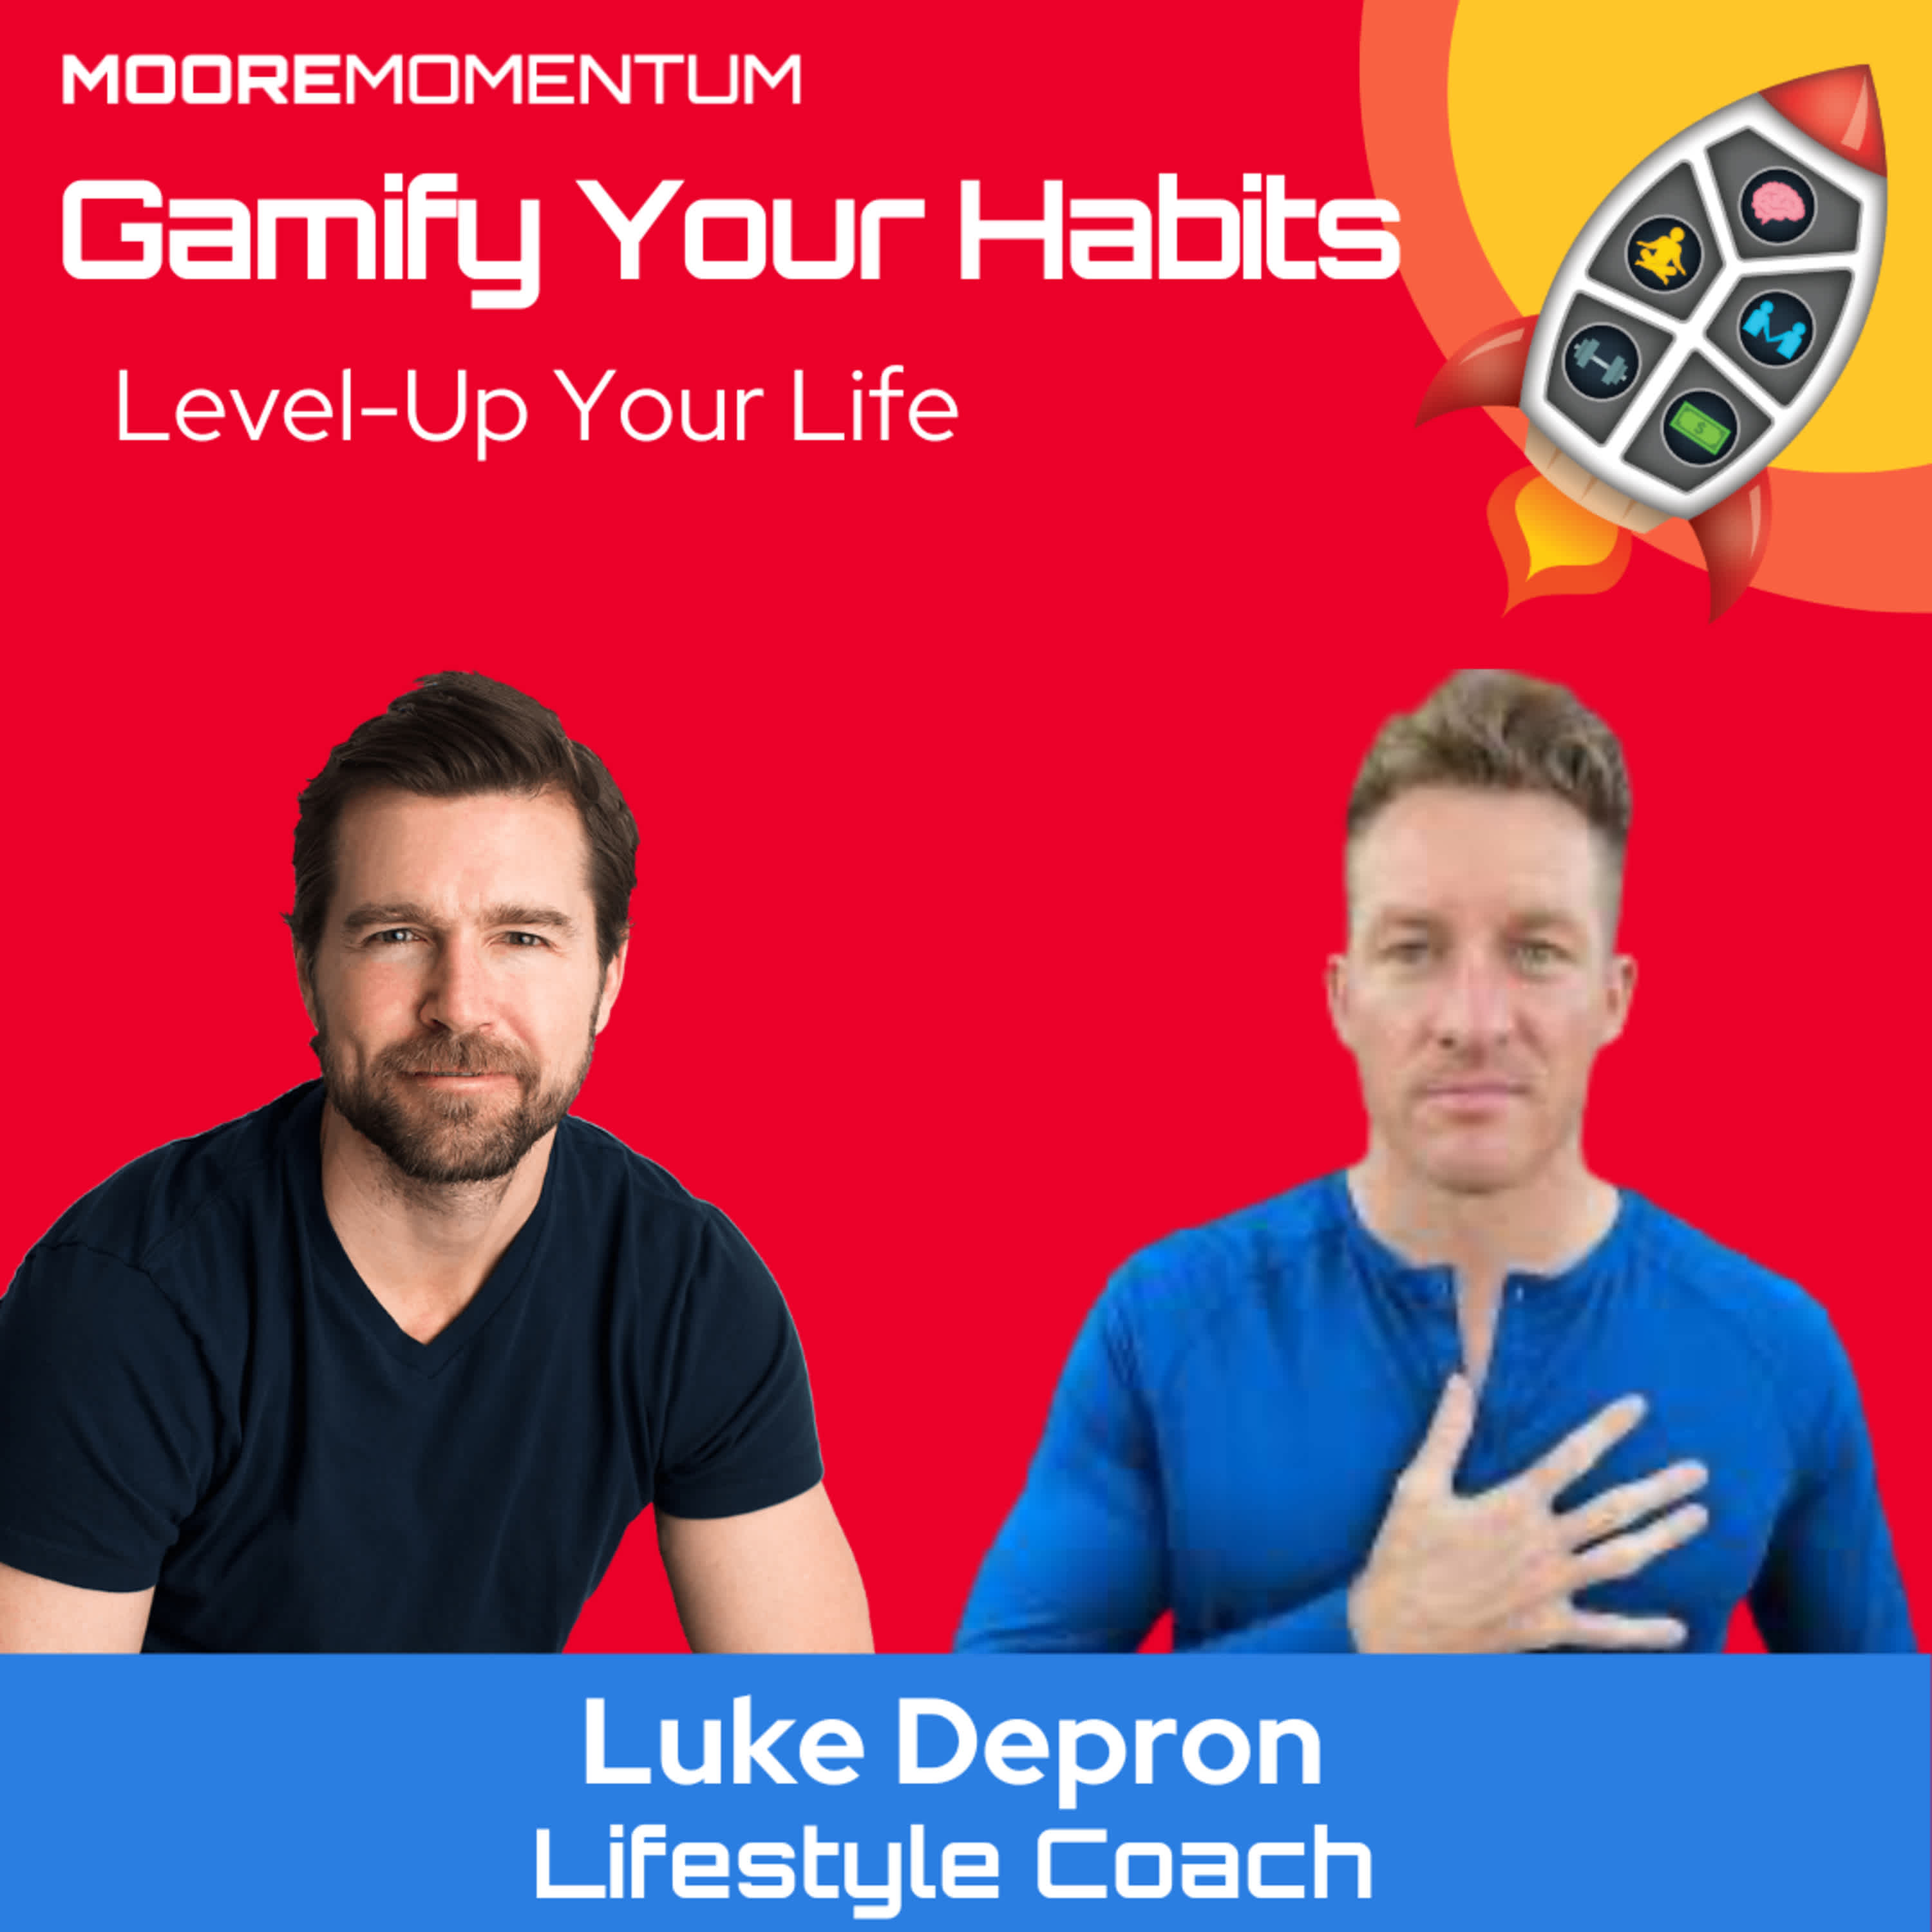 In How to Live a Holistic Life and Look Great, host Will Moore sits down with Luke Depron, Founder of Live Great Lifestyle to discuss how to lose weight and live your best life.